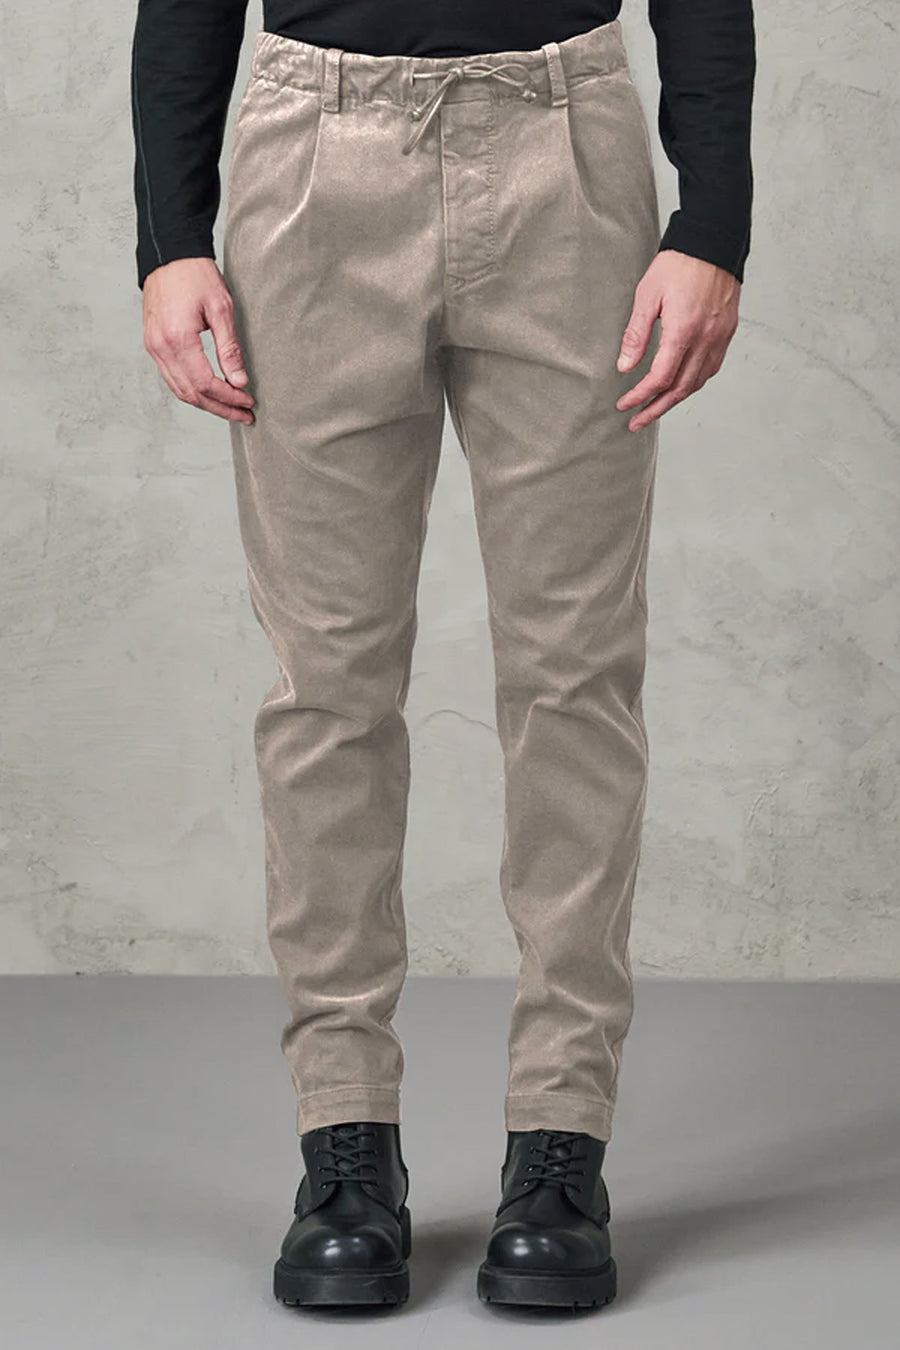 Buy the Transit Loose Fit Stretch Jogging Chinos in Taupe at Intro. Spend £50 for free UK delivery. Official stockists. We ship worldwide.